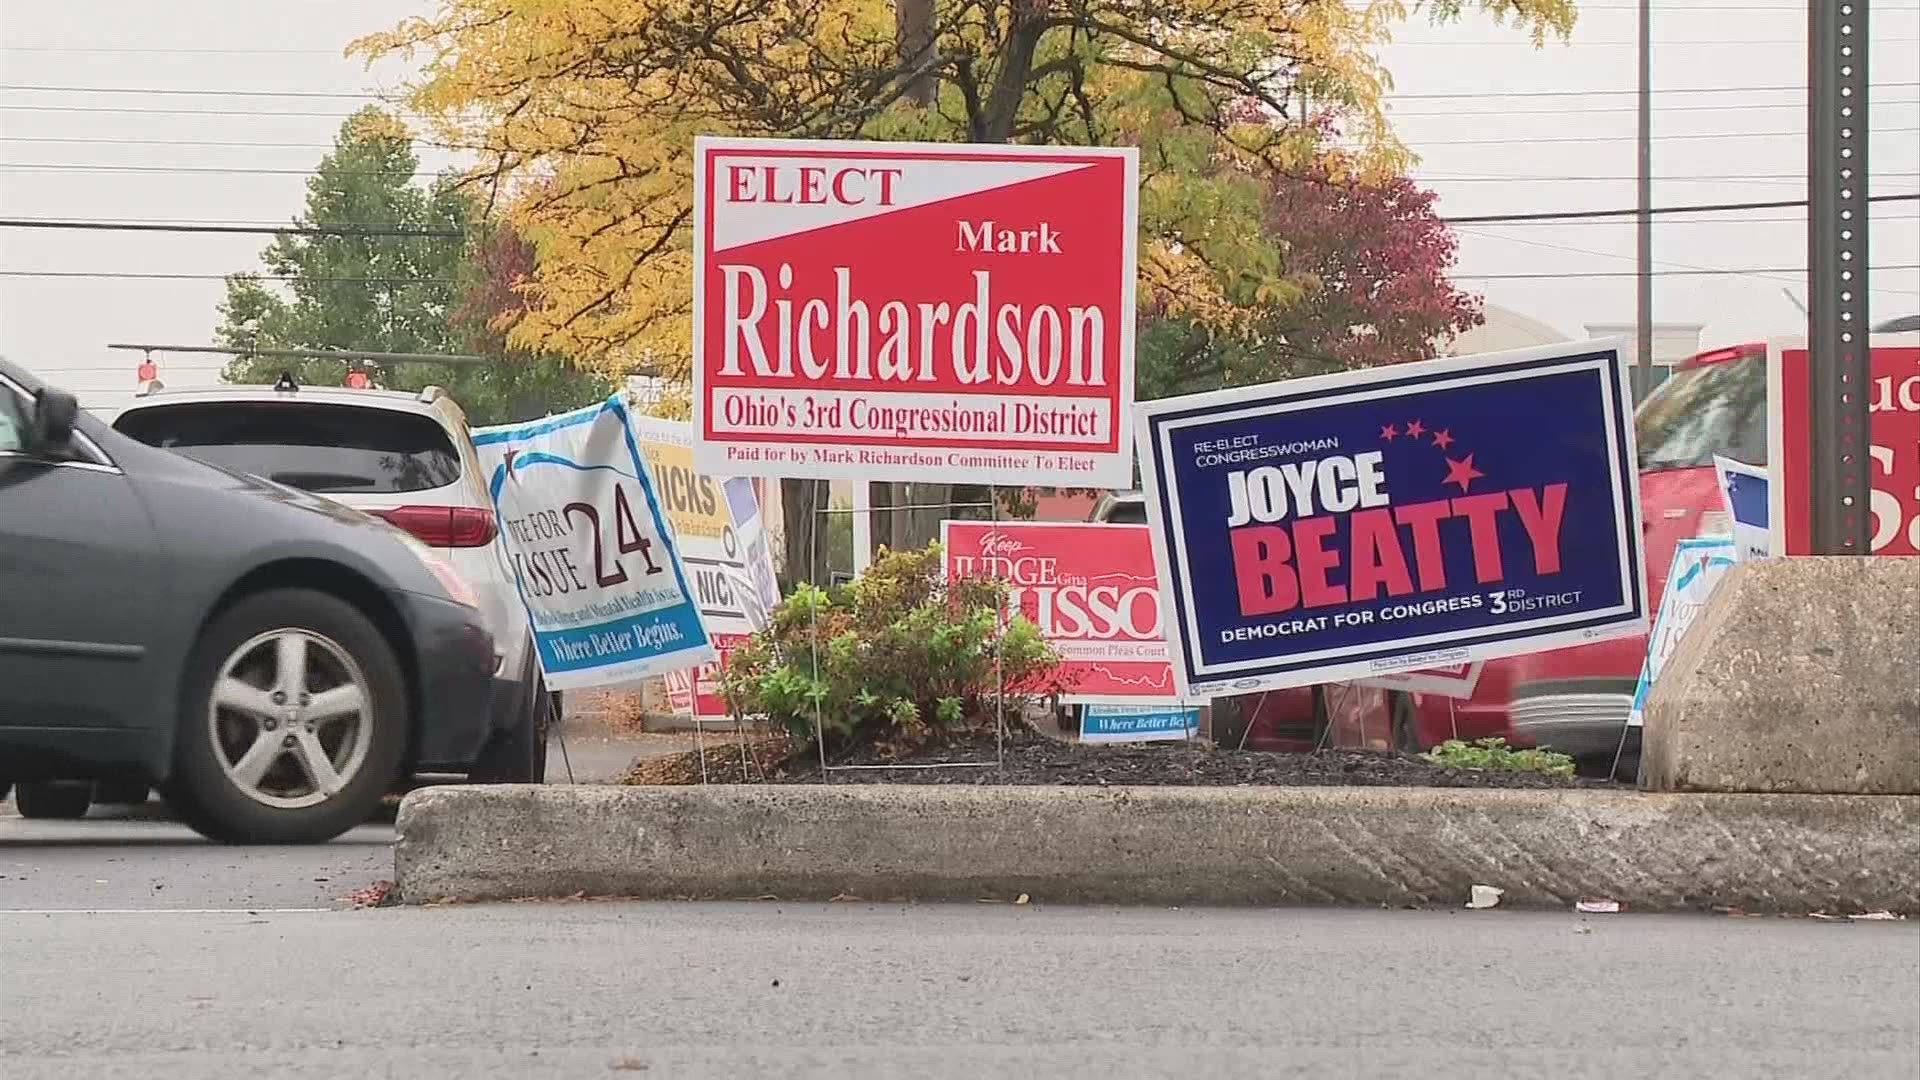 Ohio polling places have a 100-foot buffer zone that campaigners and their signs cannot cross.